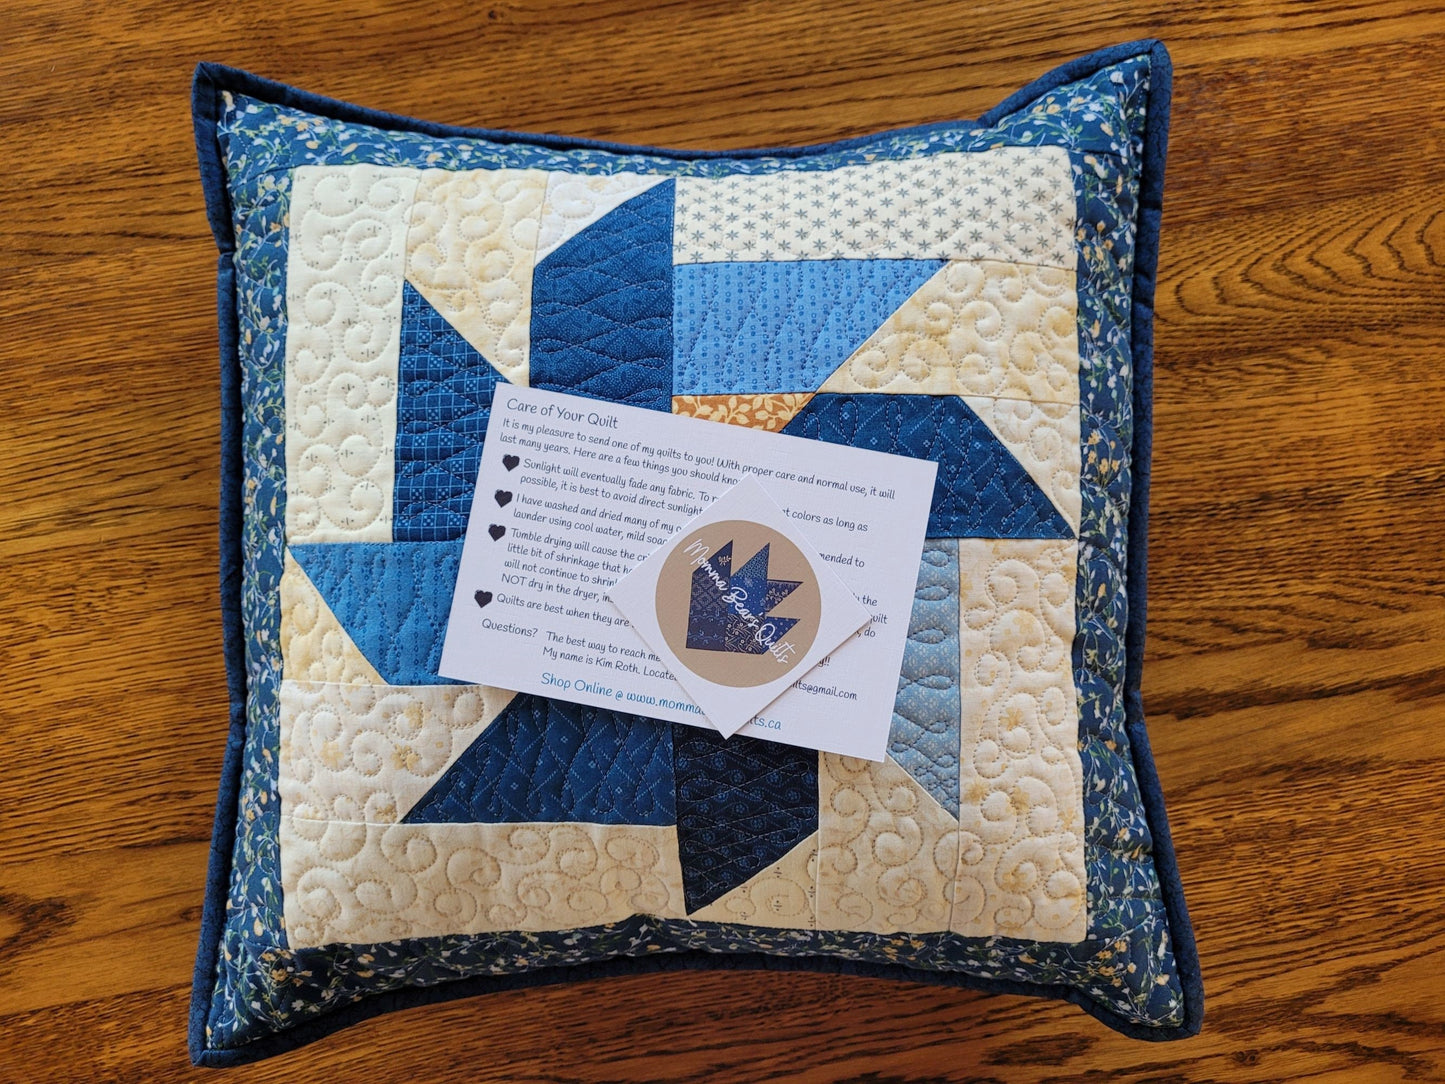 quilted pillow with care instructions